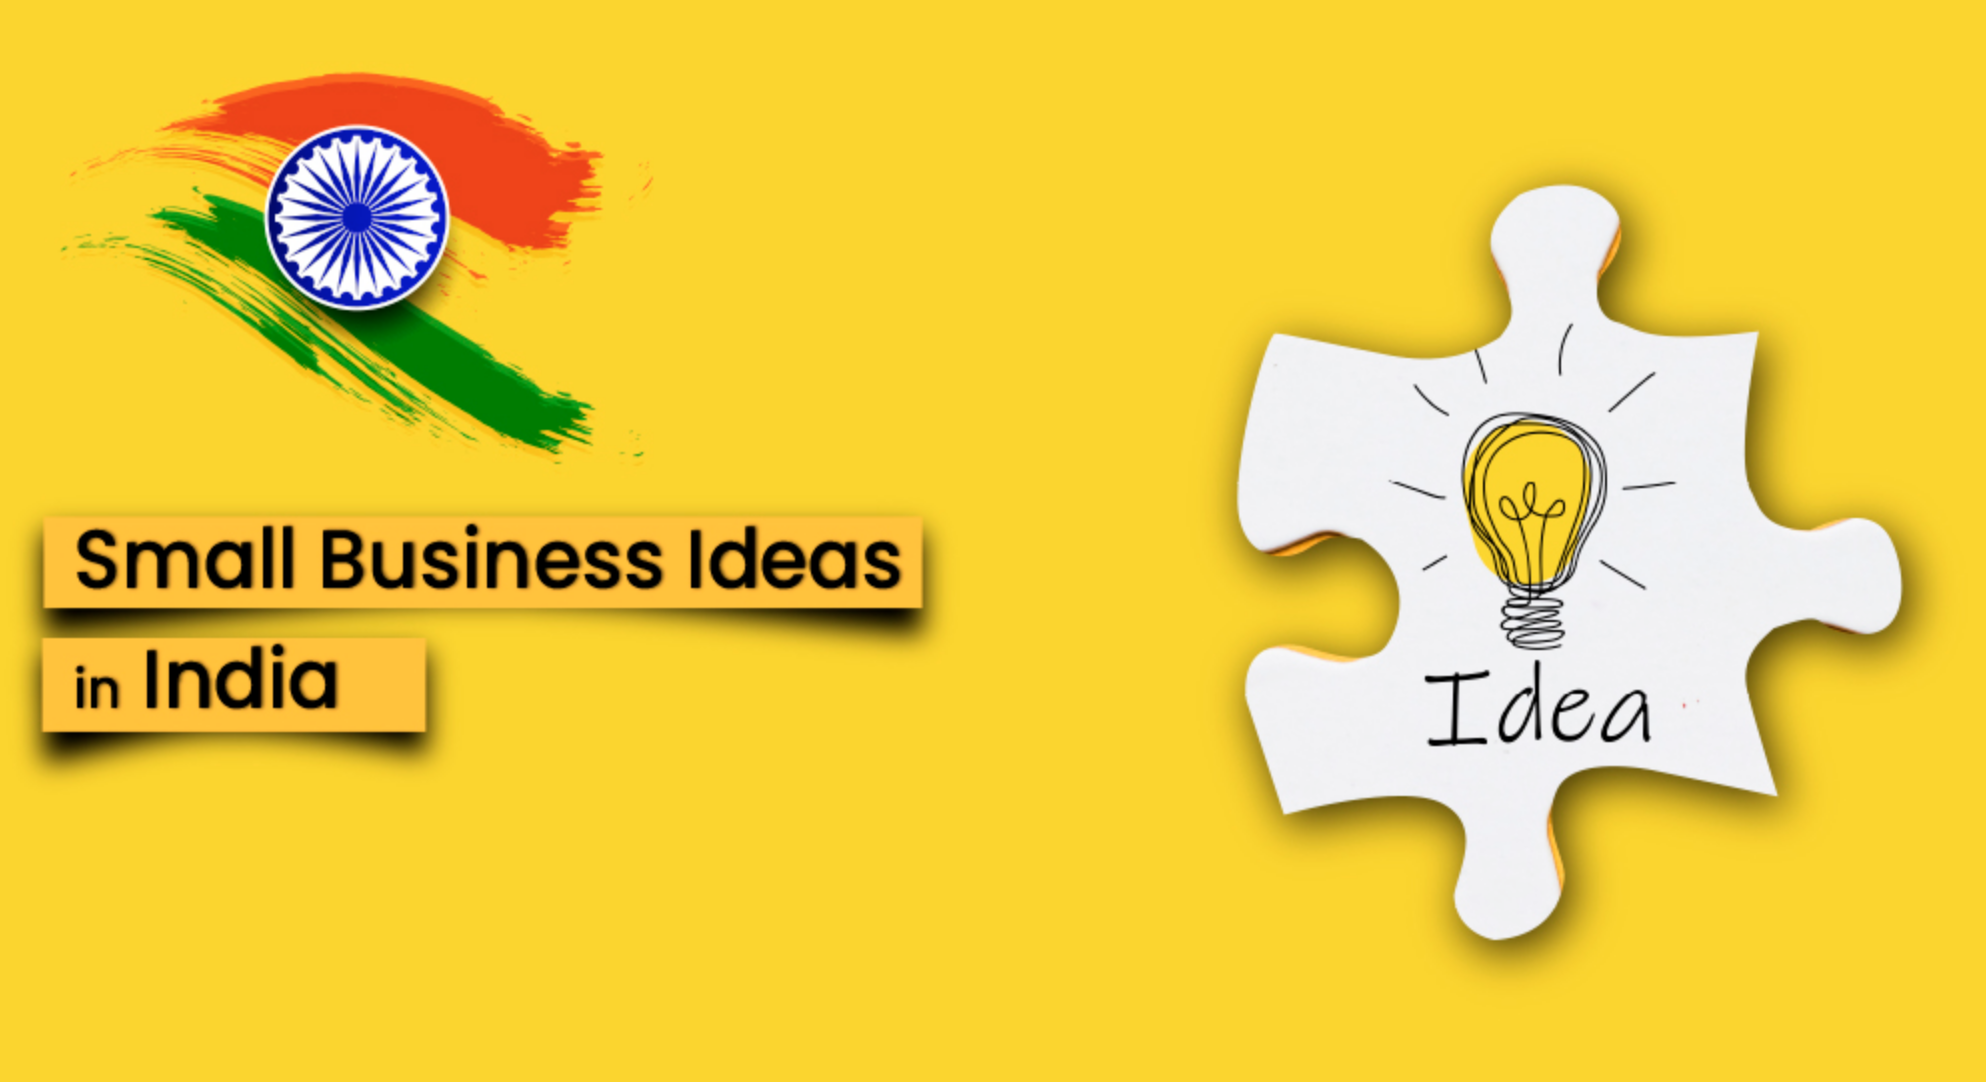 India - A land of business